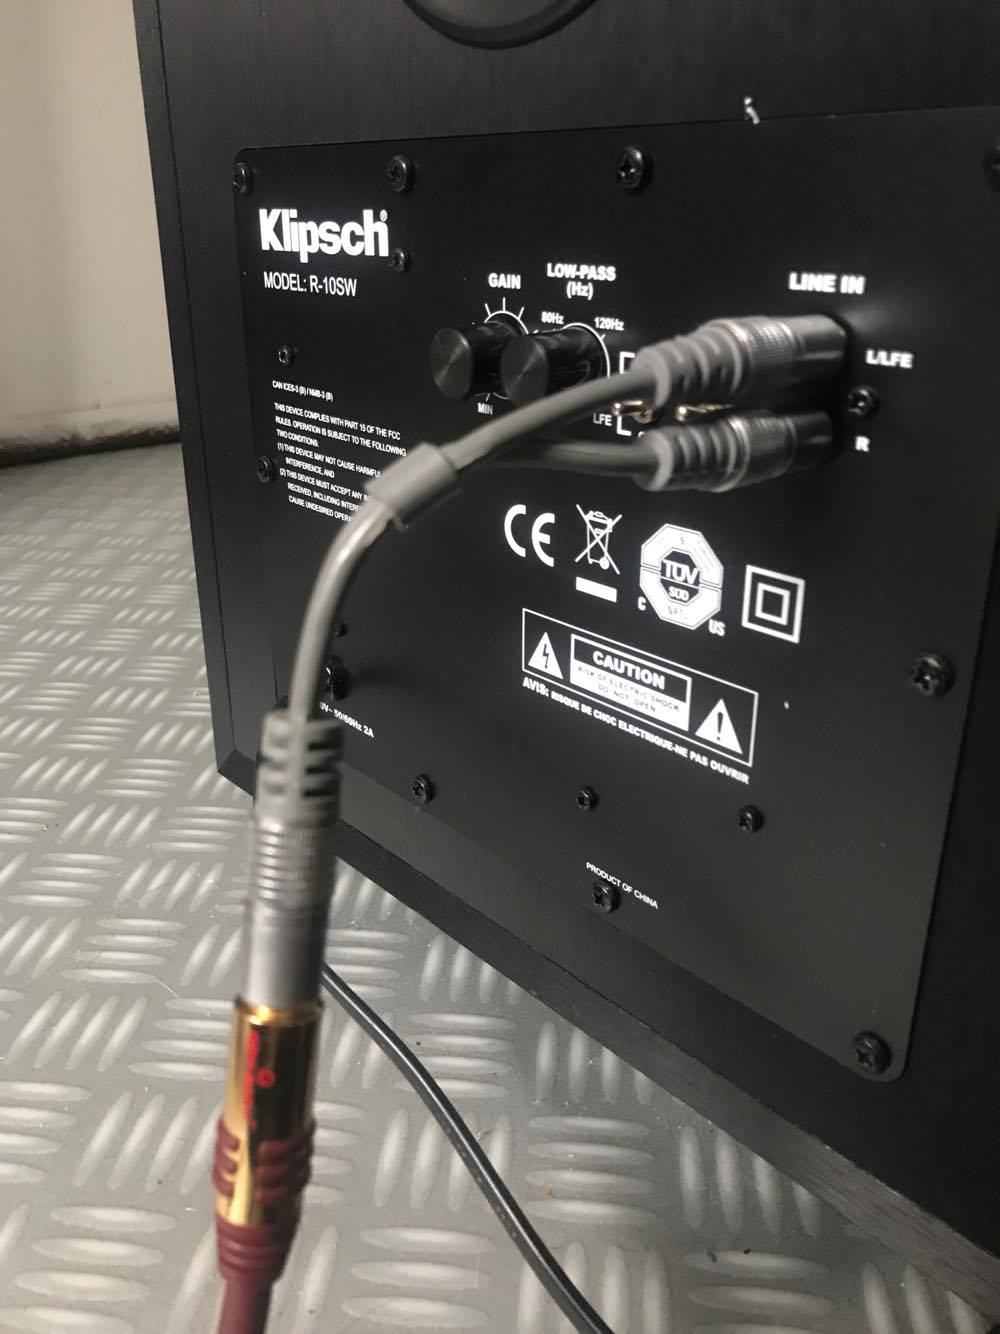 klipsch Subwoofer wont turn on - Home Theater - The Audio Community